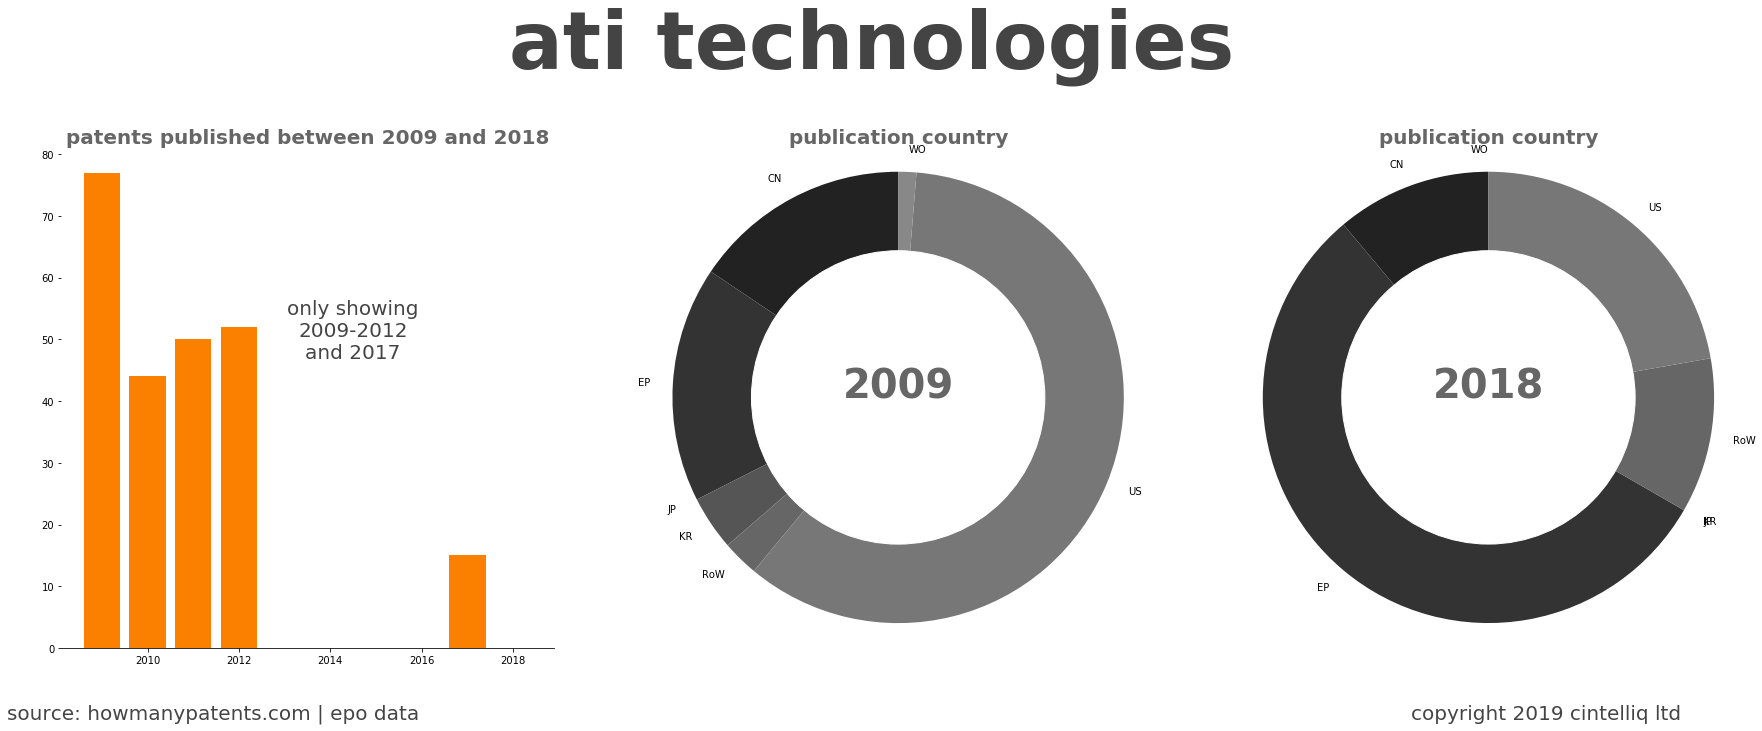 summary of patents for Ati Technologies